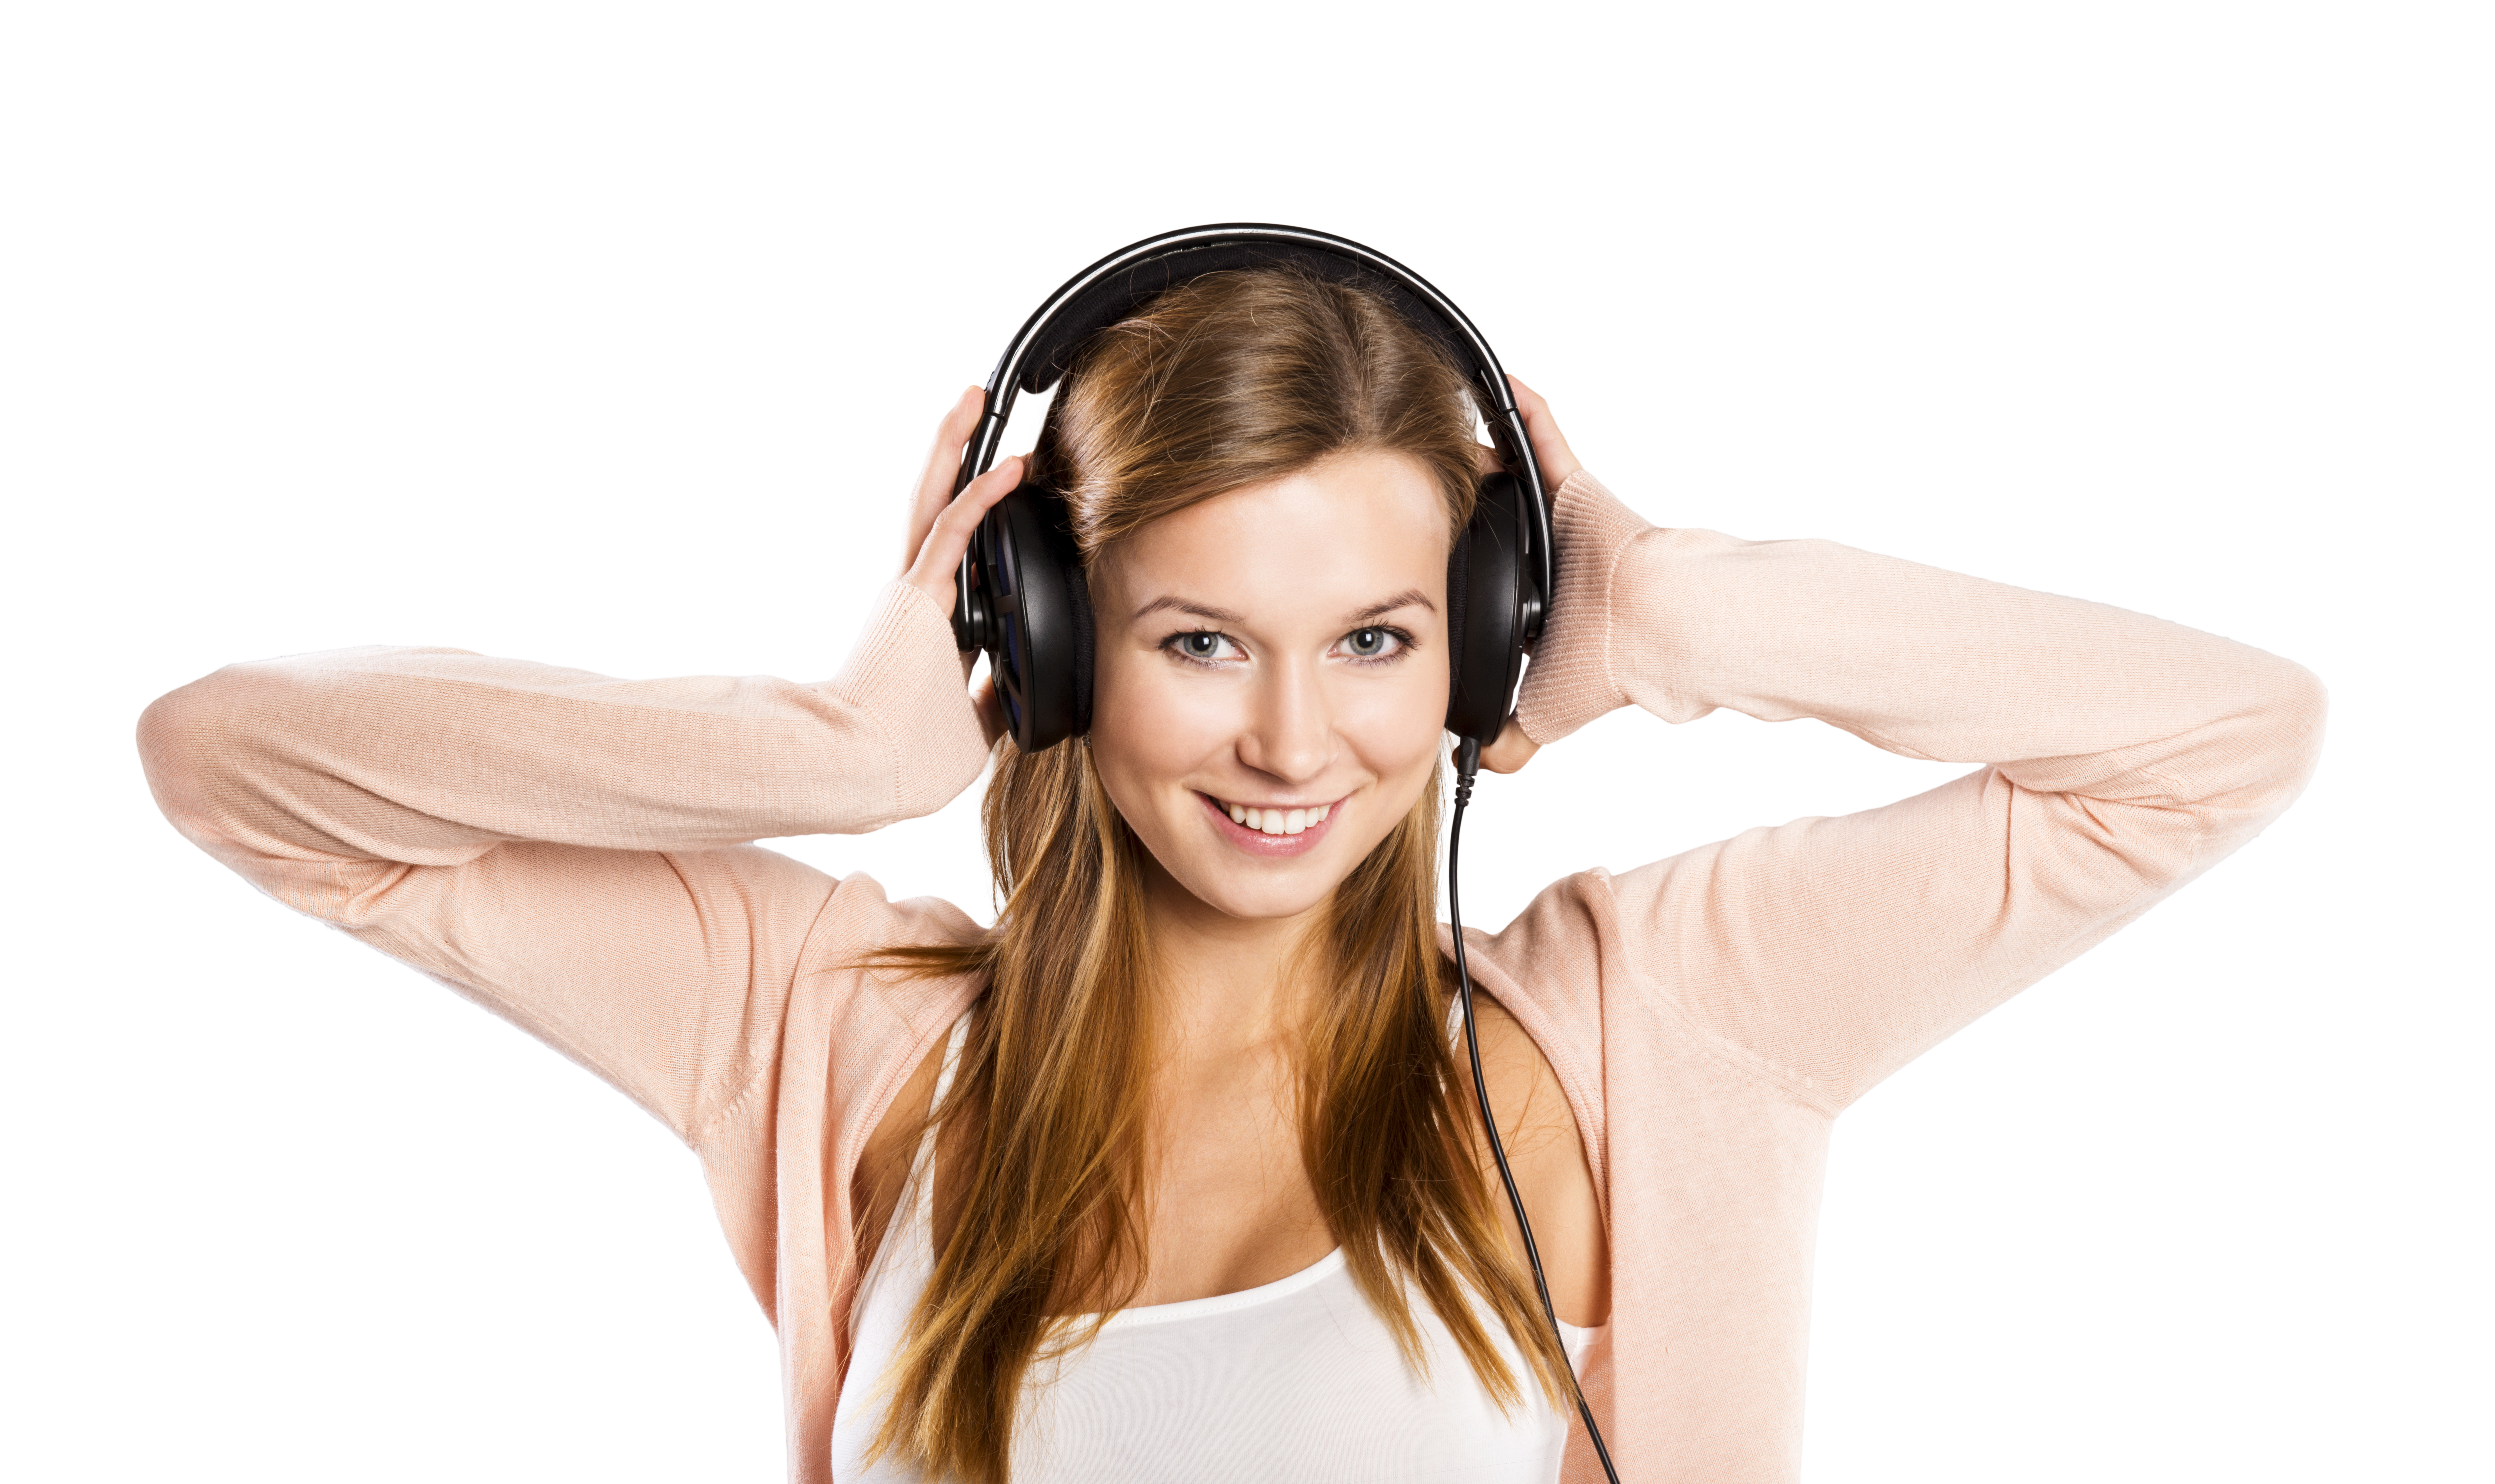 graphicstock-attractive-girl-with-headphones-on-gray-background_BRYqhmMobW.jpg